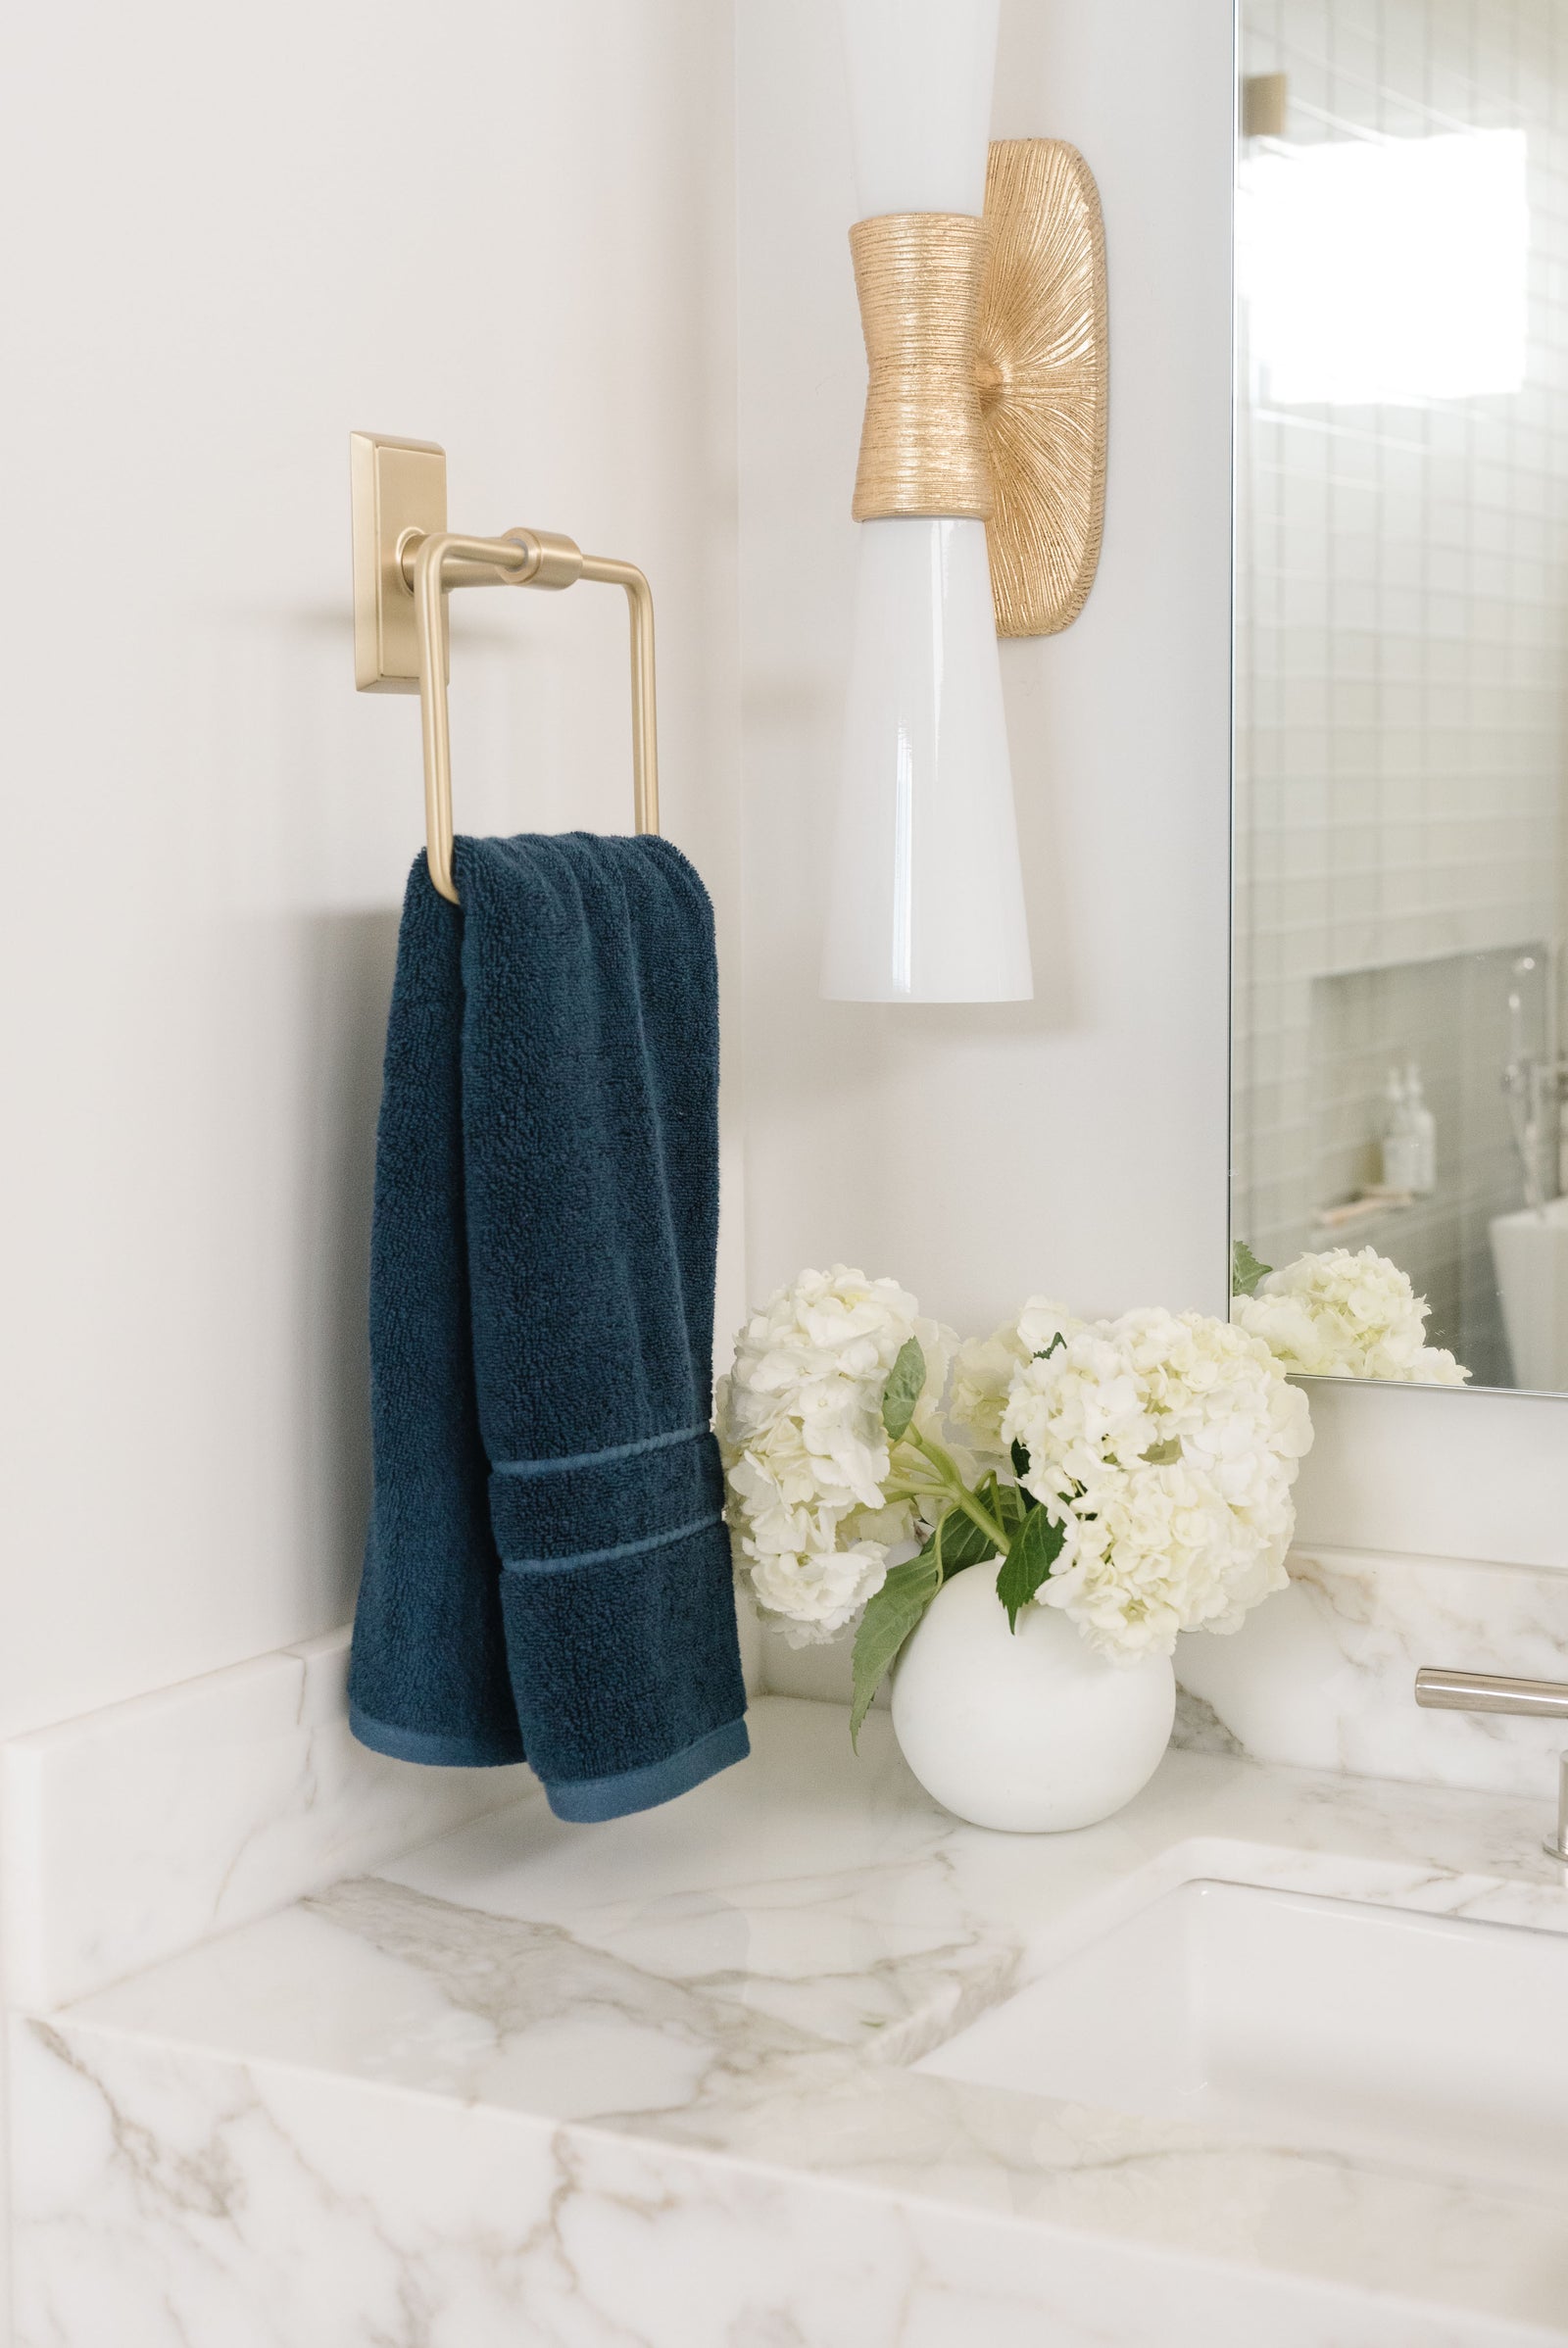 Premium Plush Hand Towel in the color Dusk. Photo of Dusk Premium Plush Hand Towel taken in a bathroom. One Premium Plush Hand Towel is hanging from a towel ring.